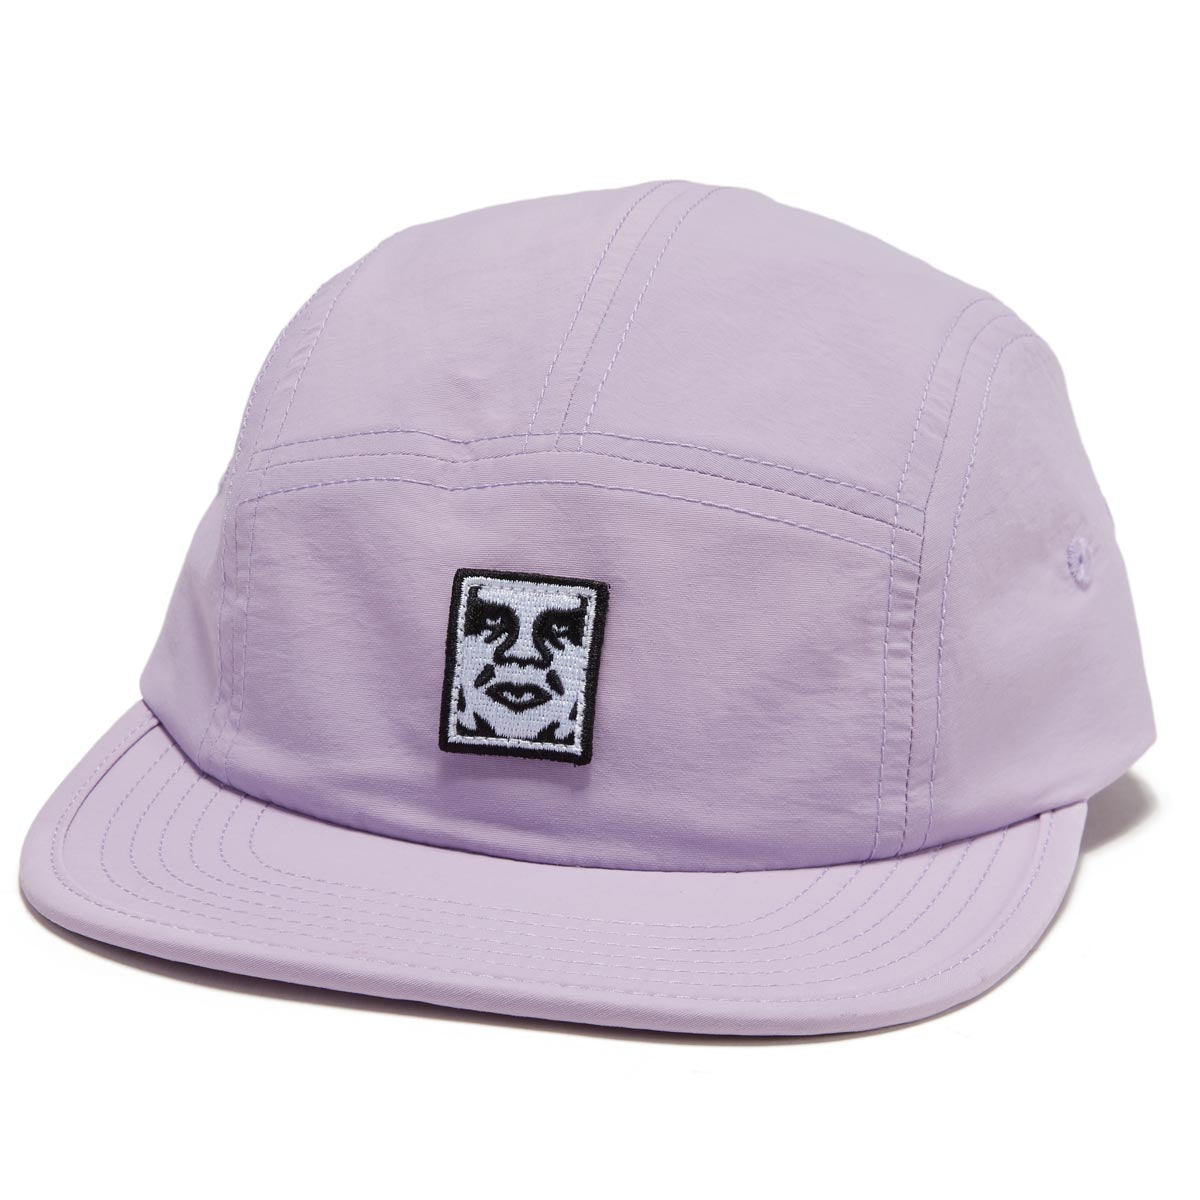 Obey Icon Patch Camp Hat - Orchid Petal image 1